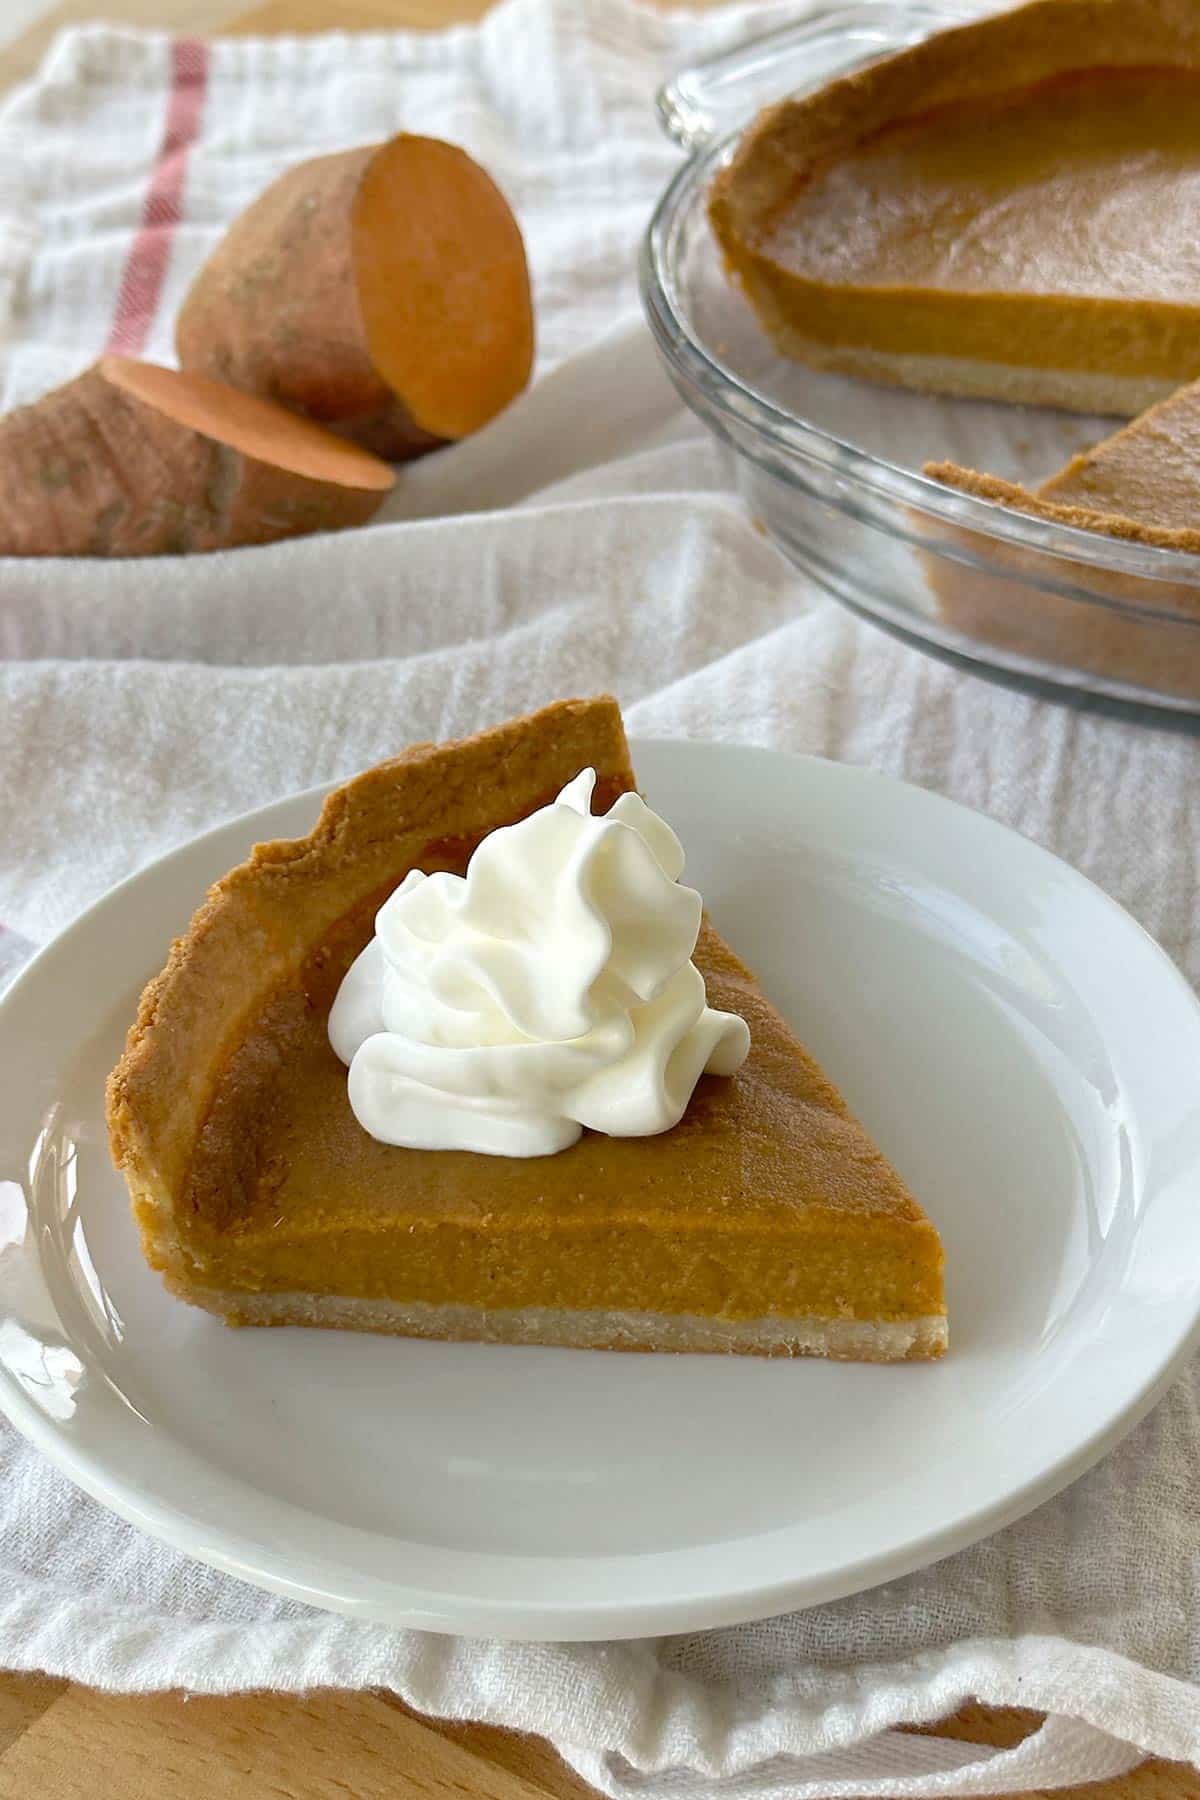 Slice of vegan sweet potato pie with dollop of whipped cream on top of a white plate. Background shows pie plate with the rest of the sweet potato pie in it and a cut open sweet potato.